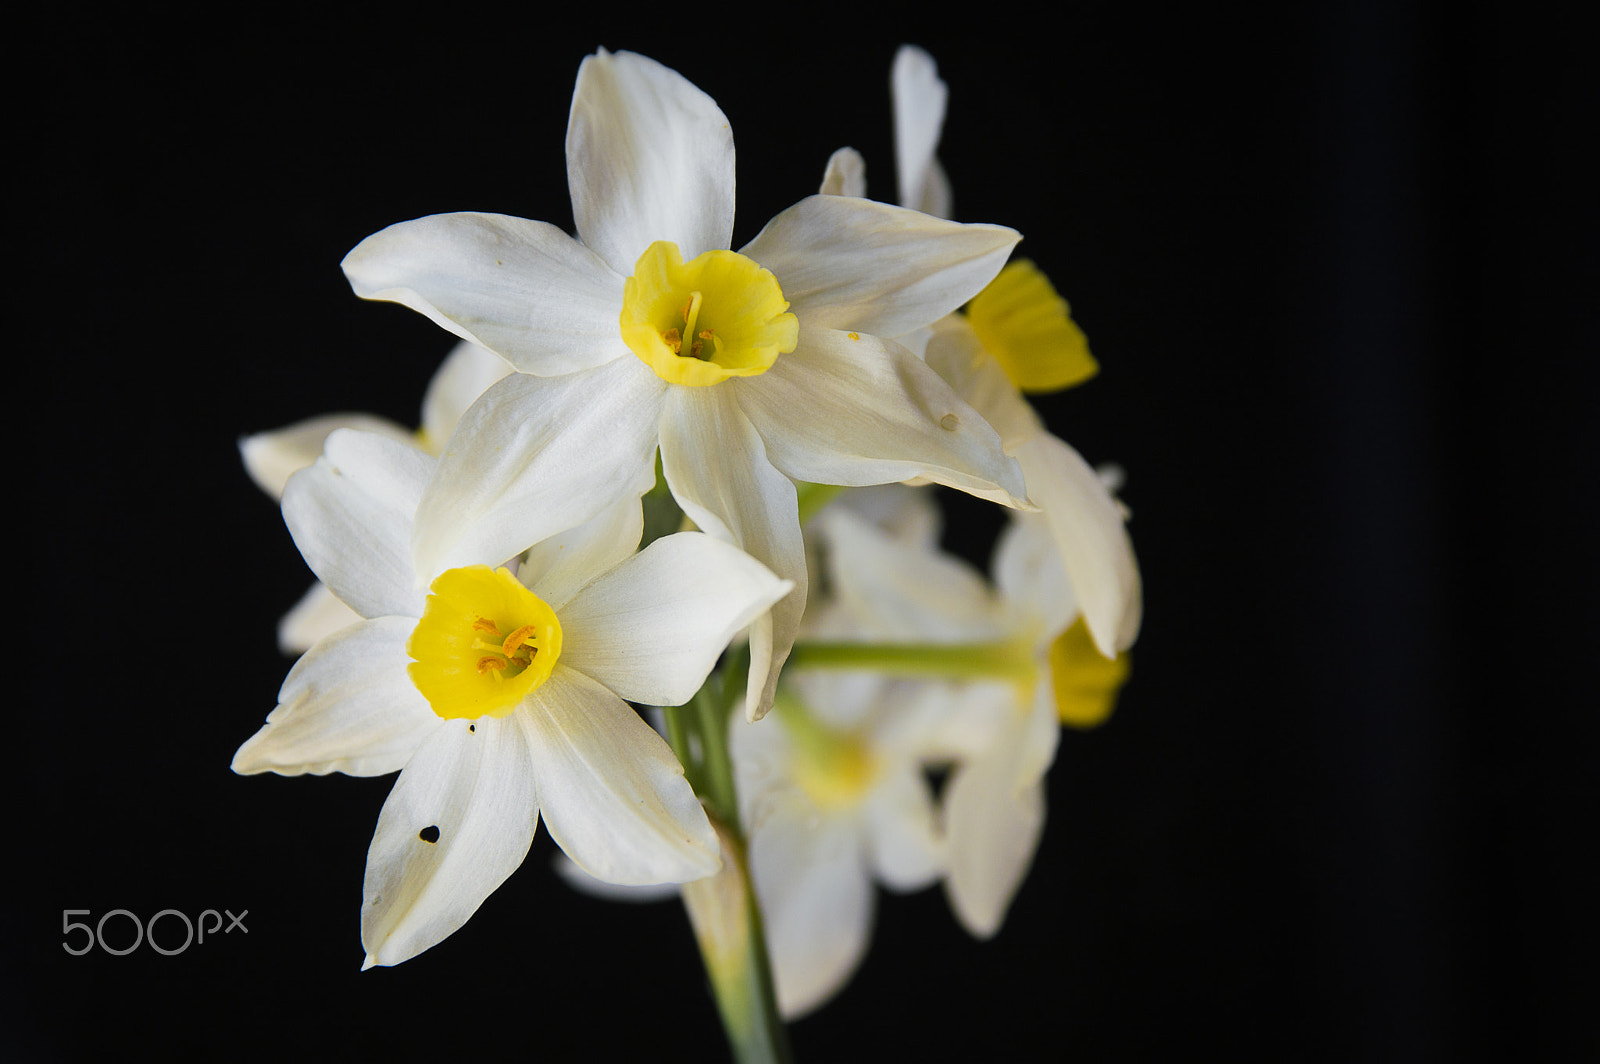 Nikon D3200 + Sigma 17-70mm F2.8-4 DC Macro OS HSM | C sample photo. Narcissus poeticus photography